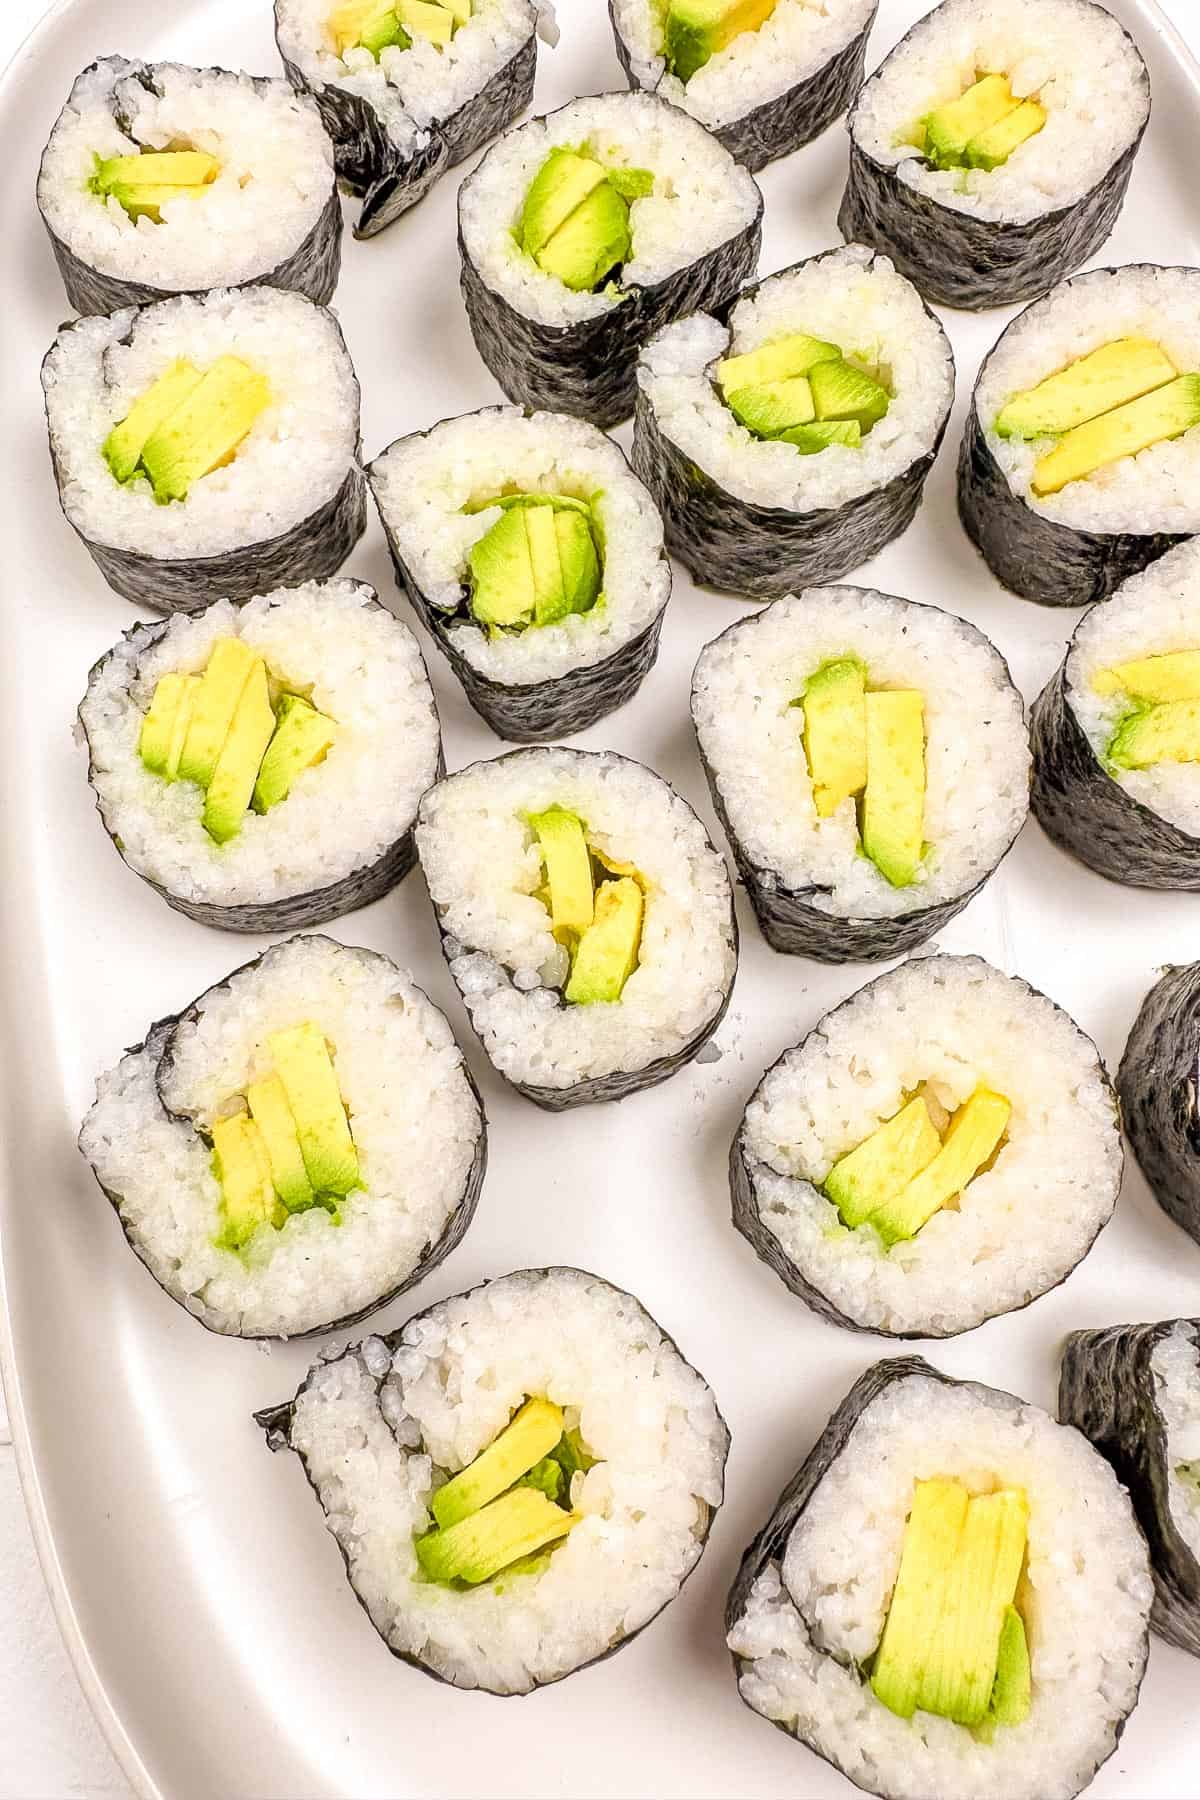 Sliced avocado sushi rolls laid out on a white plate.